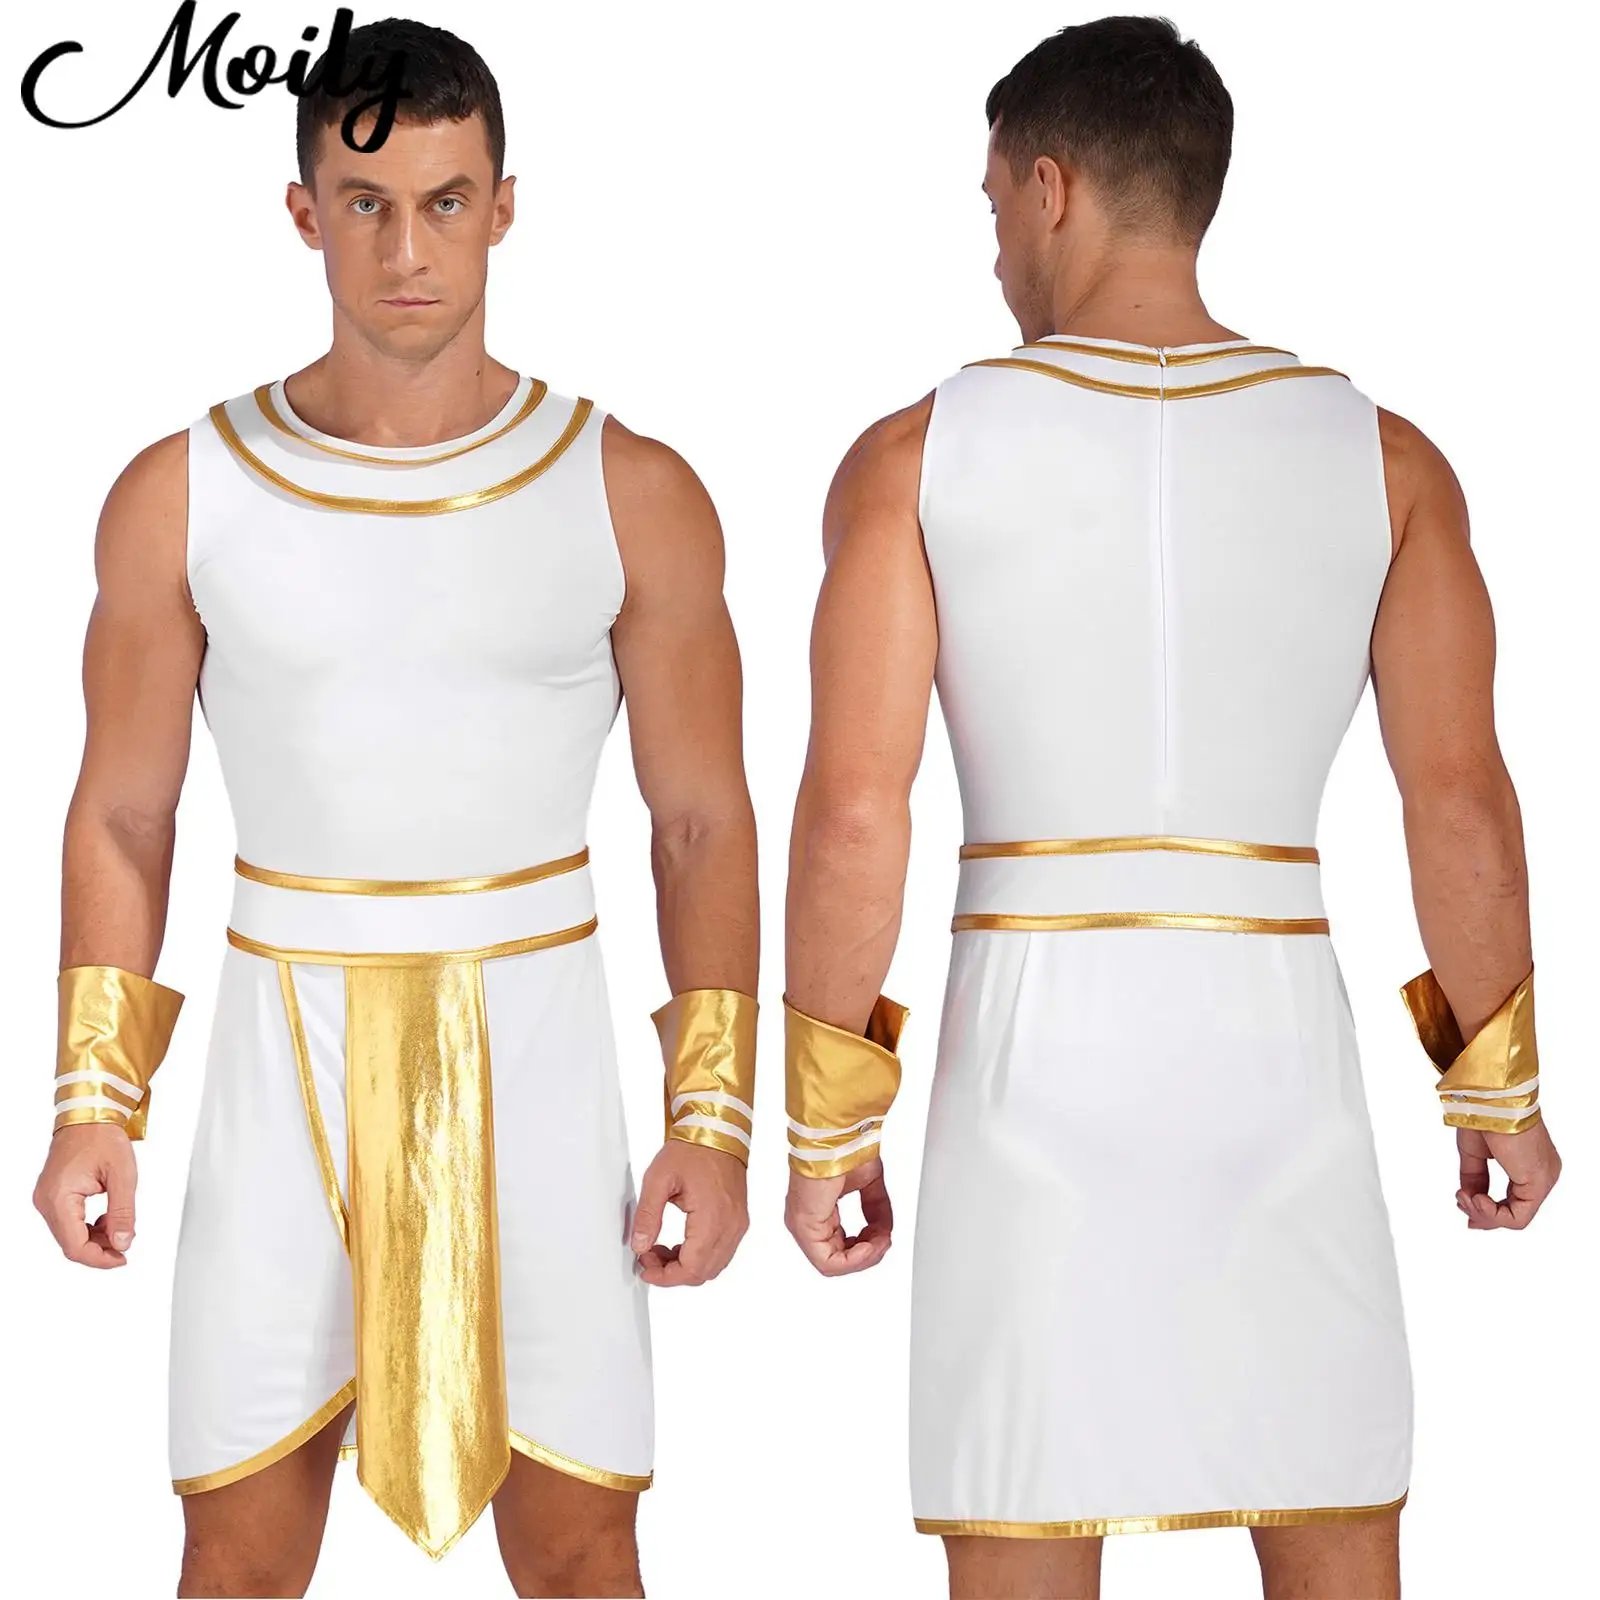 

Mens Ancient Egypt Role-Playing Outfit Adult Halloween Masquerade Party Costume Contrast Color Sleeveless Dress with Cuffs